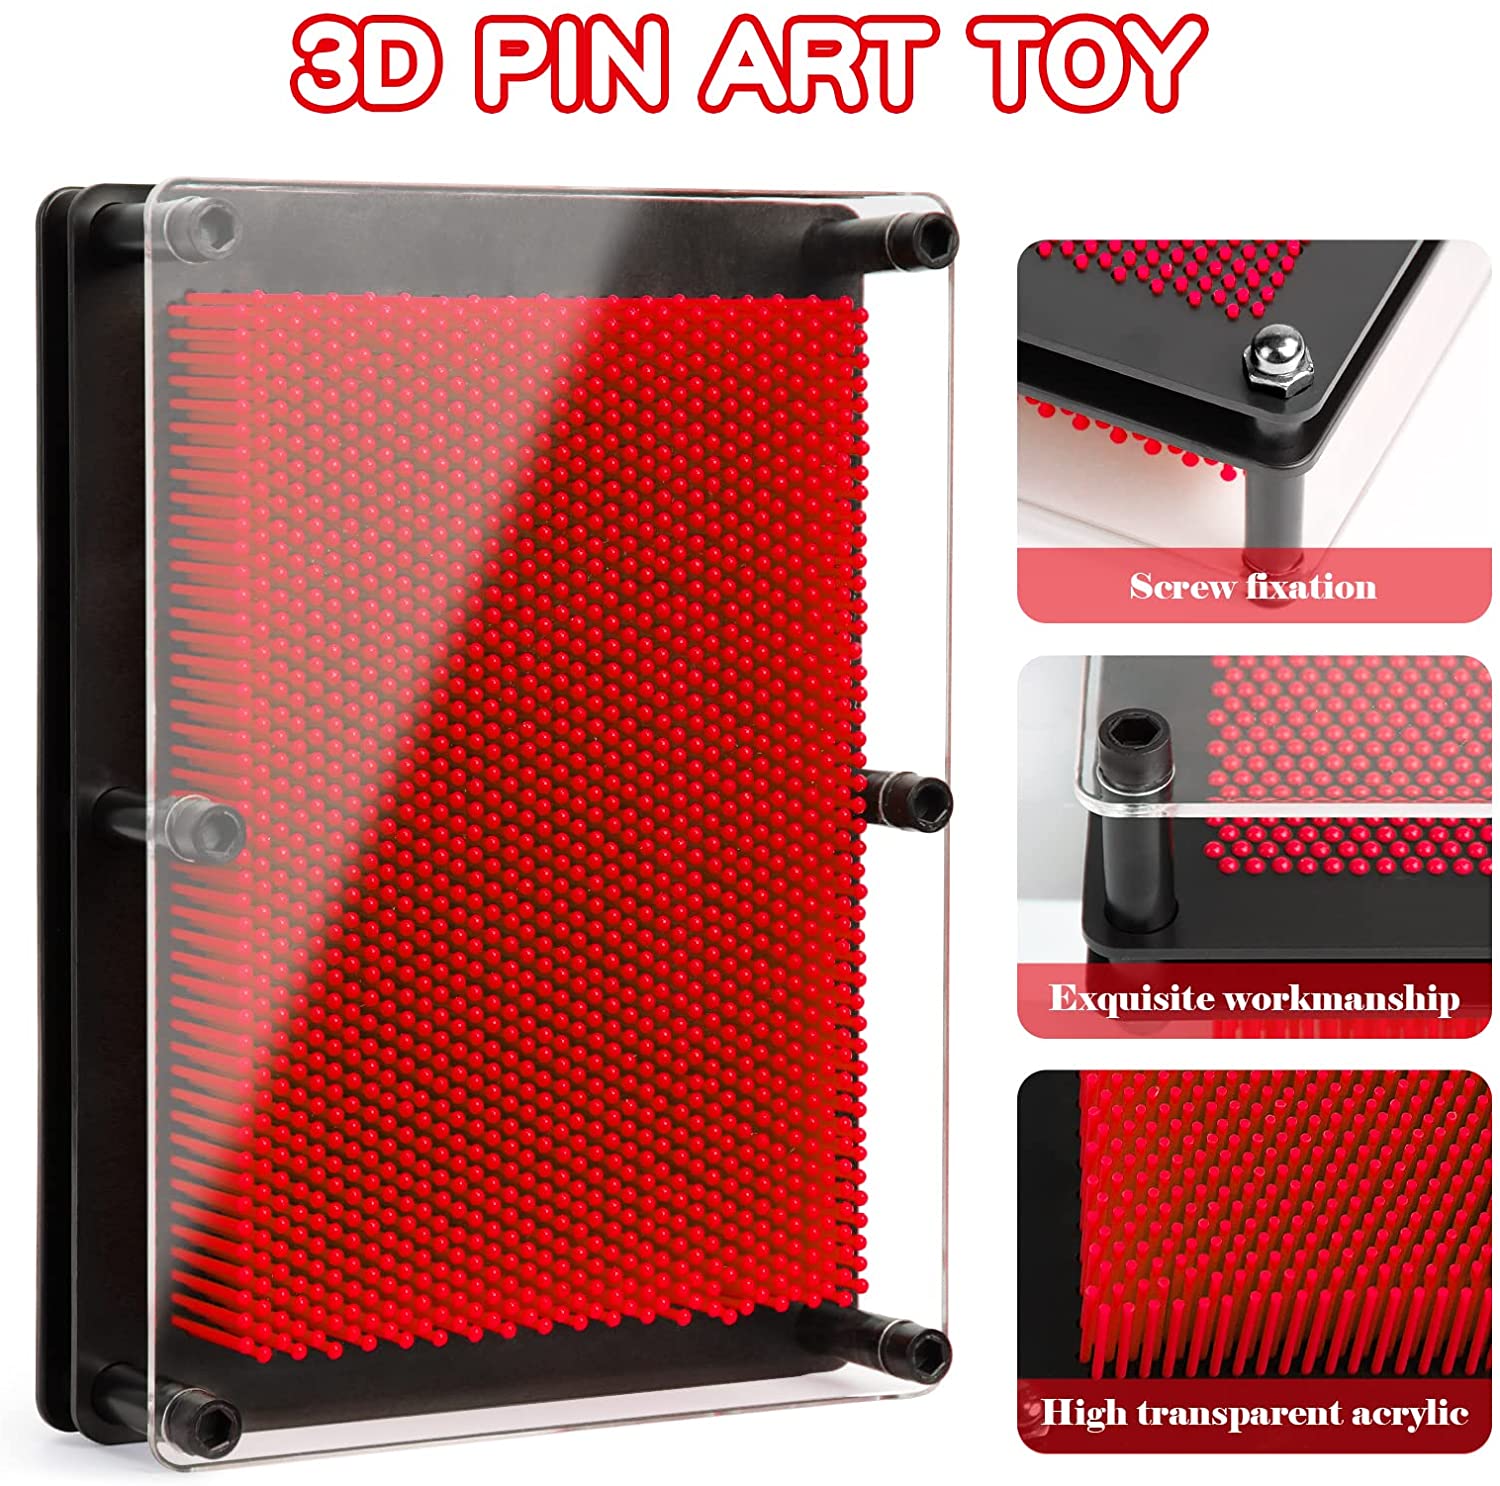 Emerge Pin Art Sculpture Impression 3D Toy (Red)